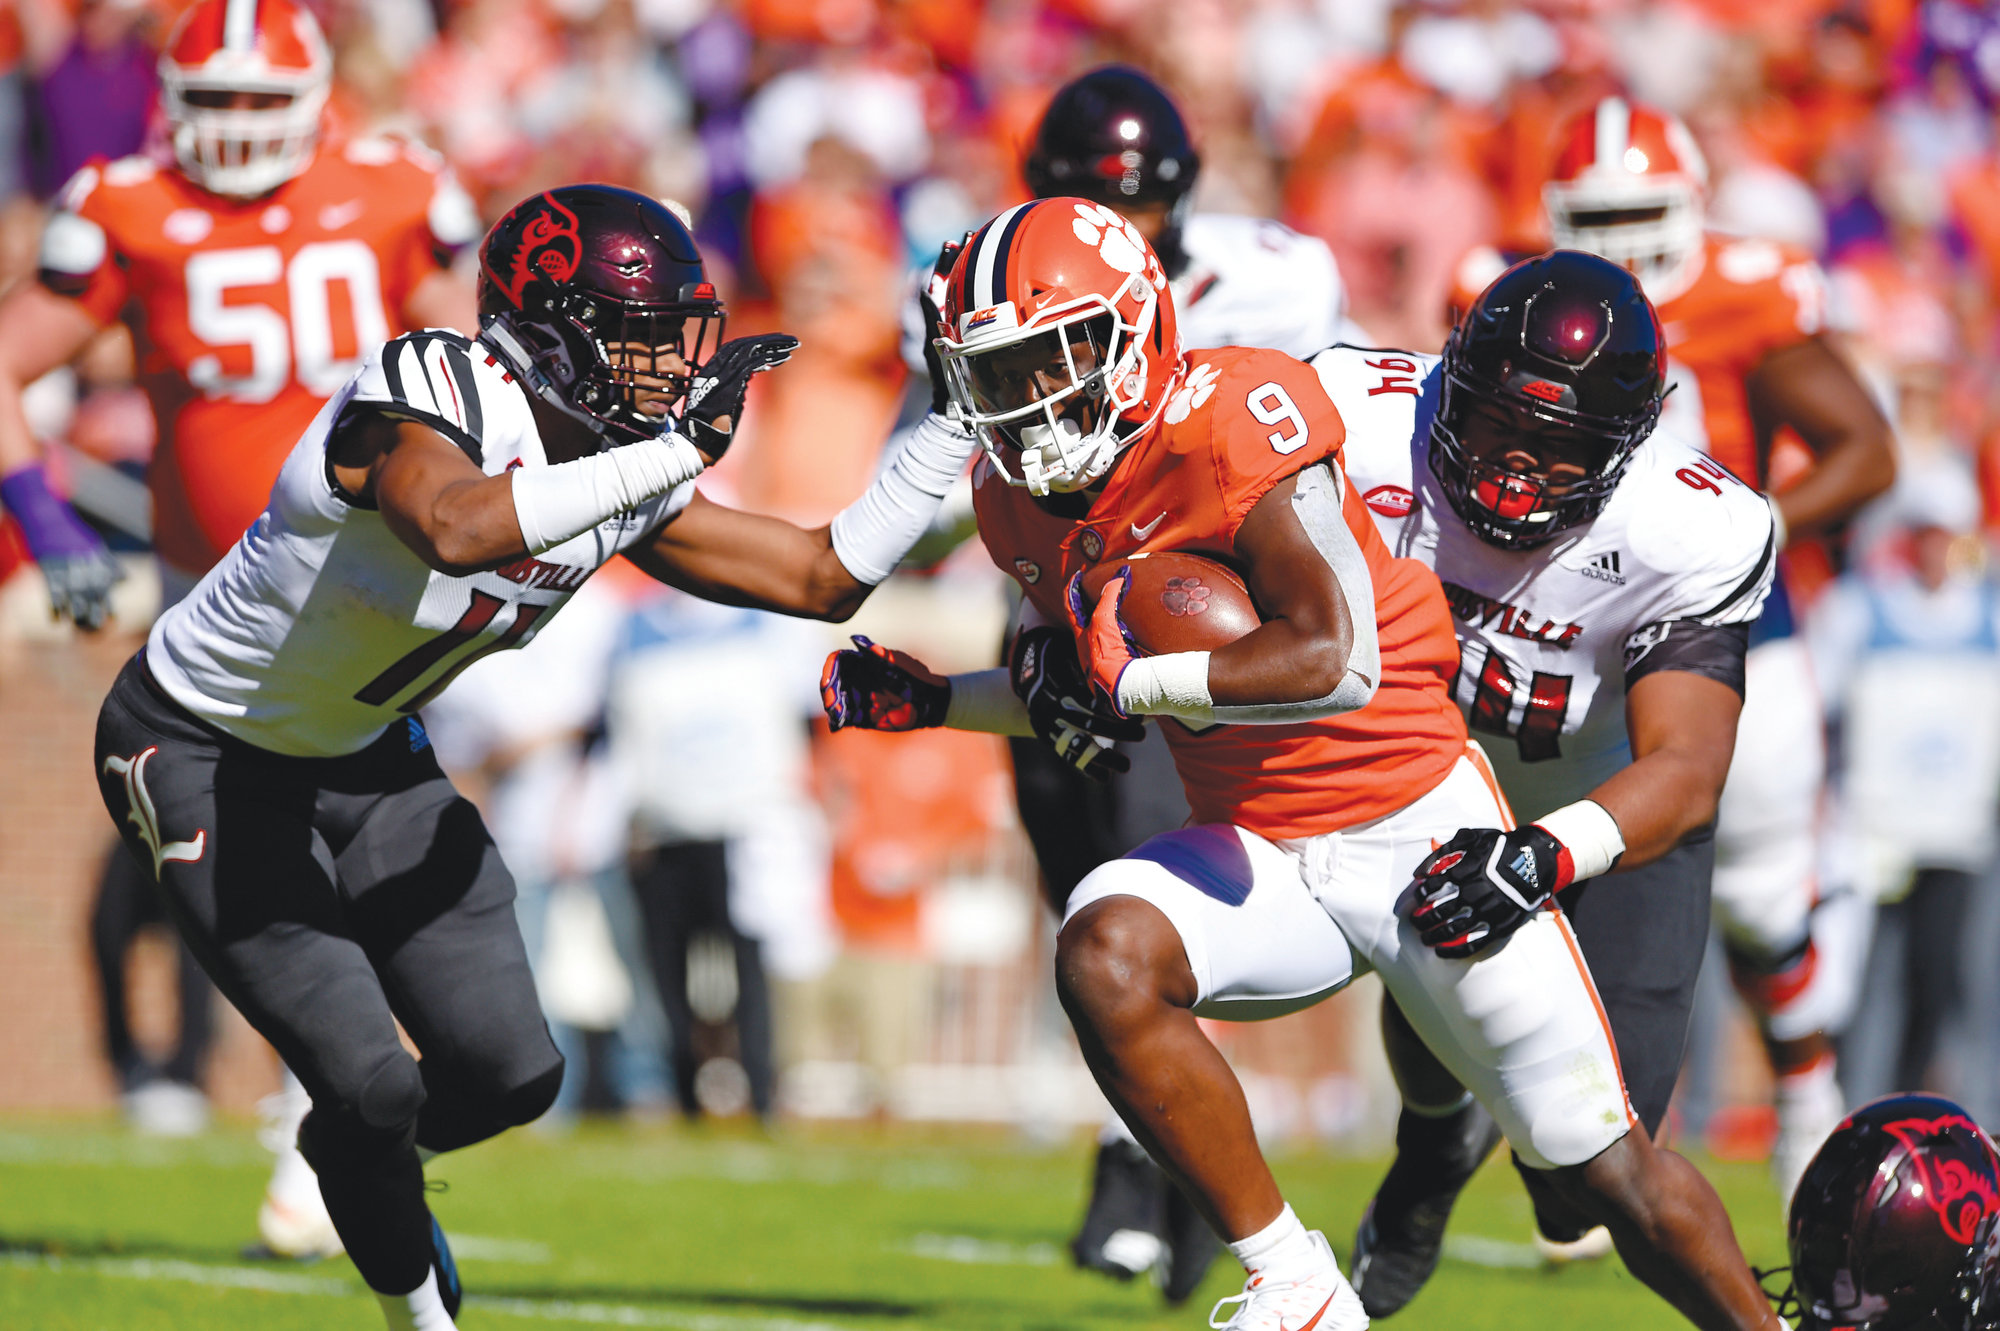 Clemson's Travis Etienne rushes through Louisville's Dee Smith (11) and G.G. Robinson to score a touchdown during the first half of an NCAA college football game Saturday, Nov. 3, 2018, in Clemson, S.C. (AP Photo/Richard Shiro)